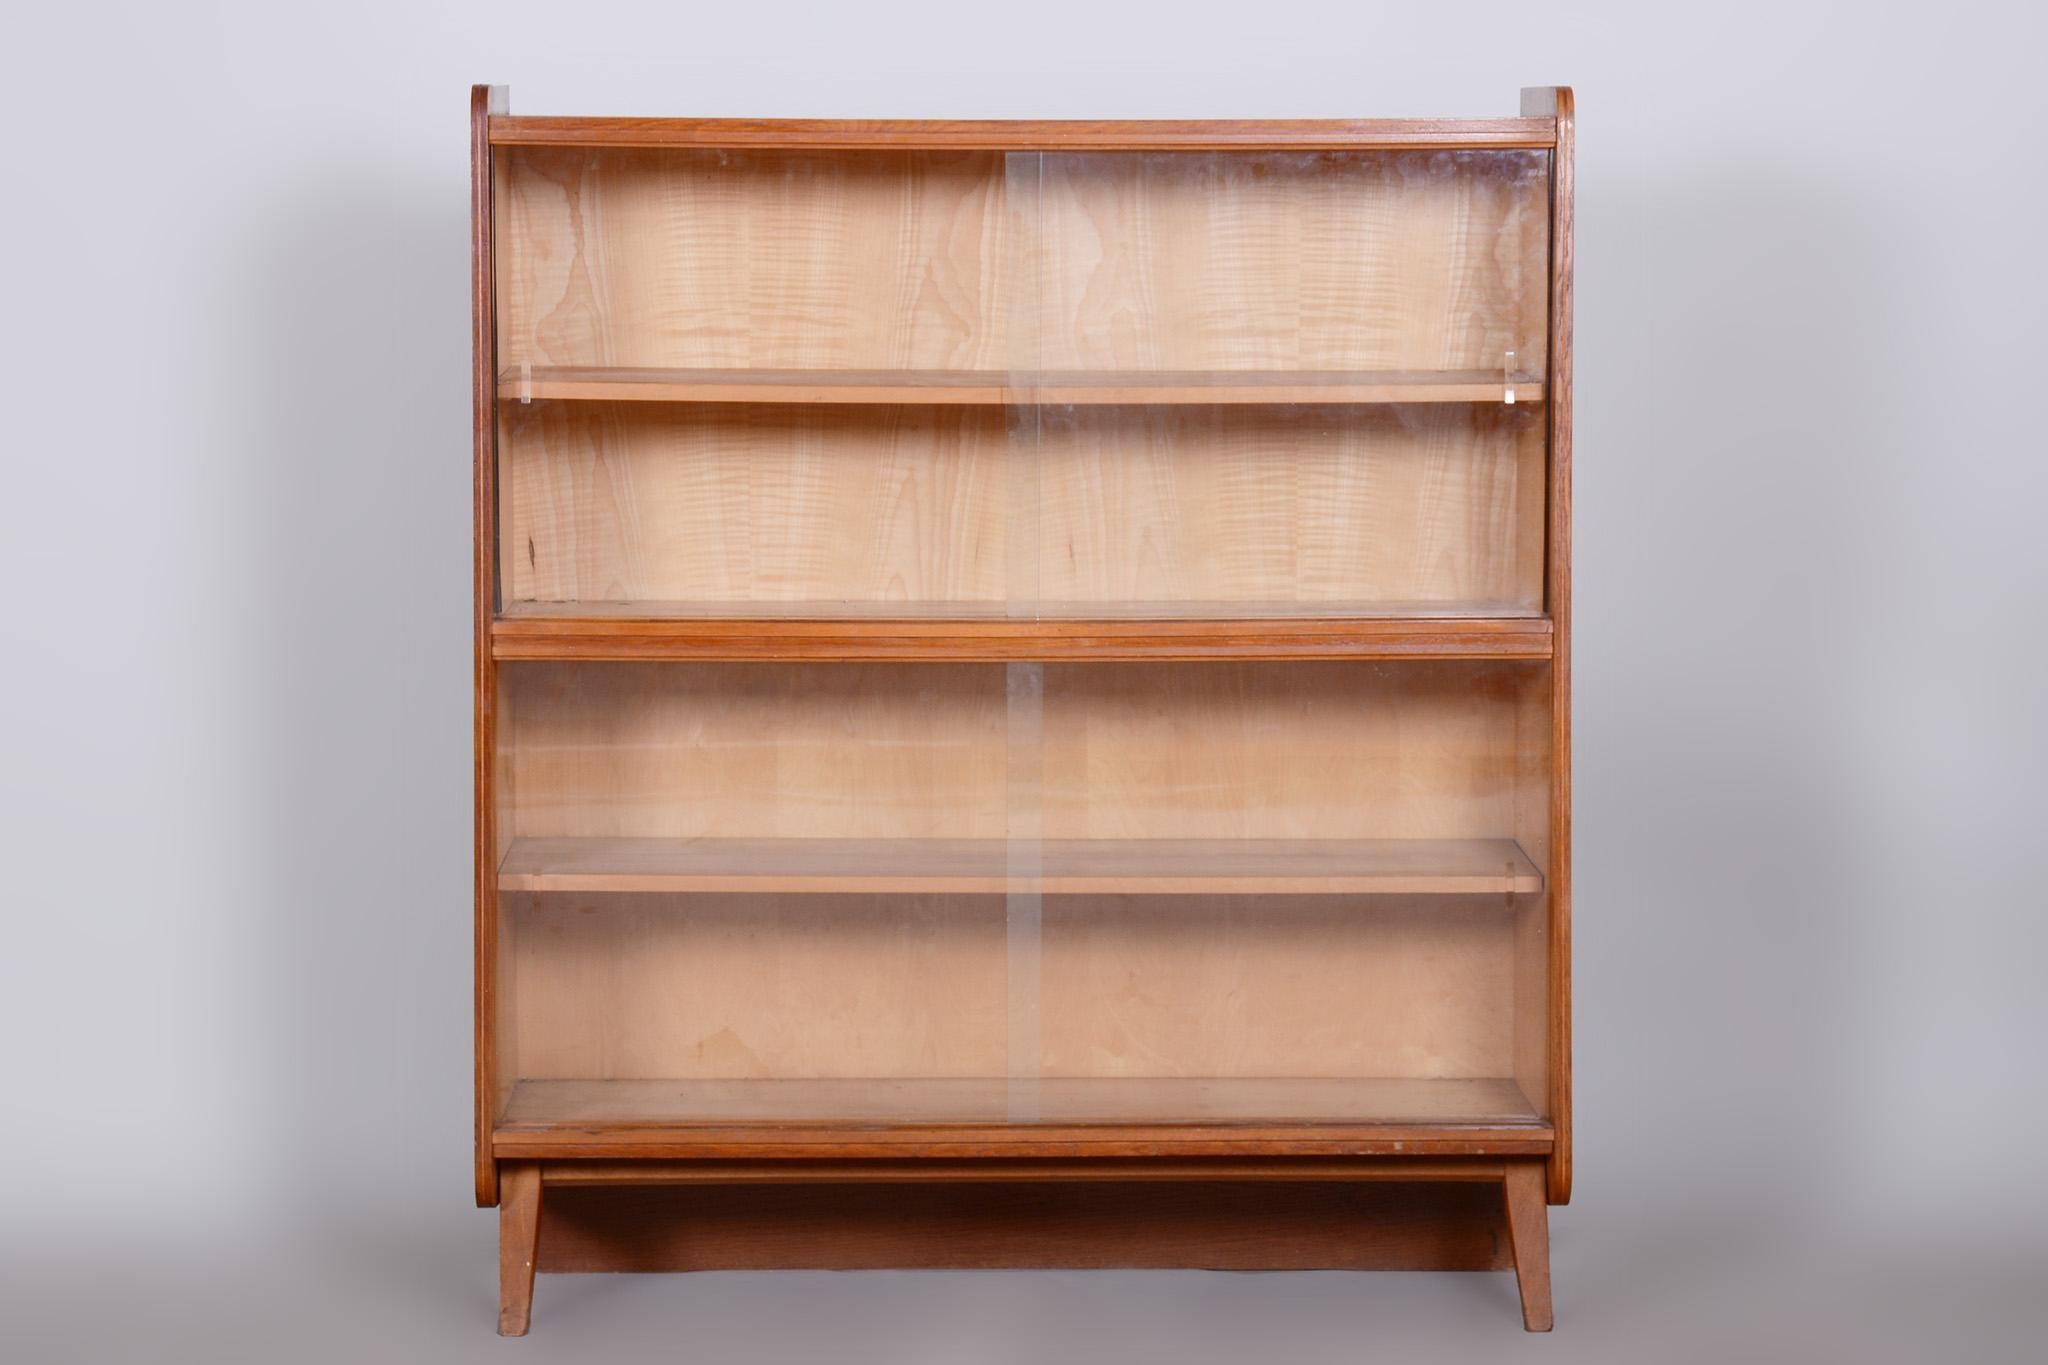 Restored midcentury oak bookcase. Revived polish.

Period: 1950-1959
Source: Czechia (Czechoslovakia)
Material: Oak, glass

It has been fully restored by our professional refurbishing team in Czechia according to the original process. 

This